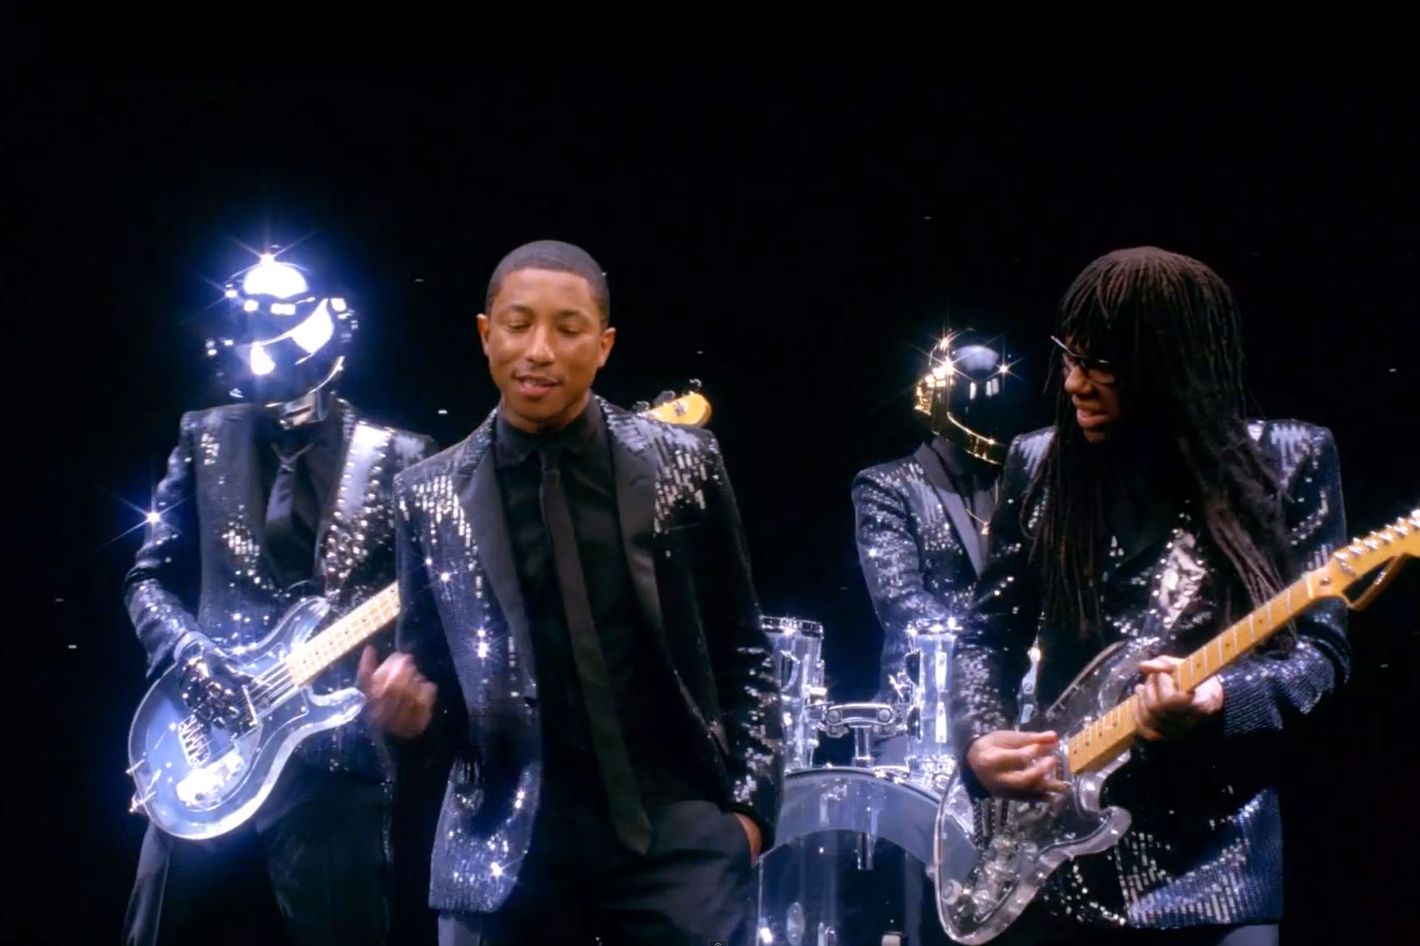 Get lucky s. Daft Punk Pharrell Williams and Nile Rodgers. Дафт панк get Lucky. Pharrell Williams Daft Punk. Pharrell Williams, Daft Punk, Nile Rodgers - get Lucky.